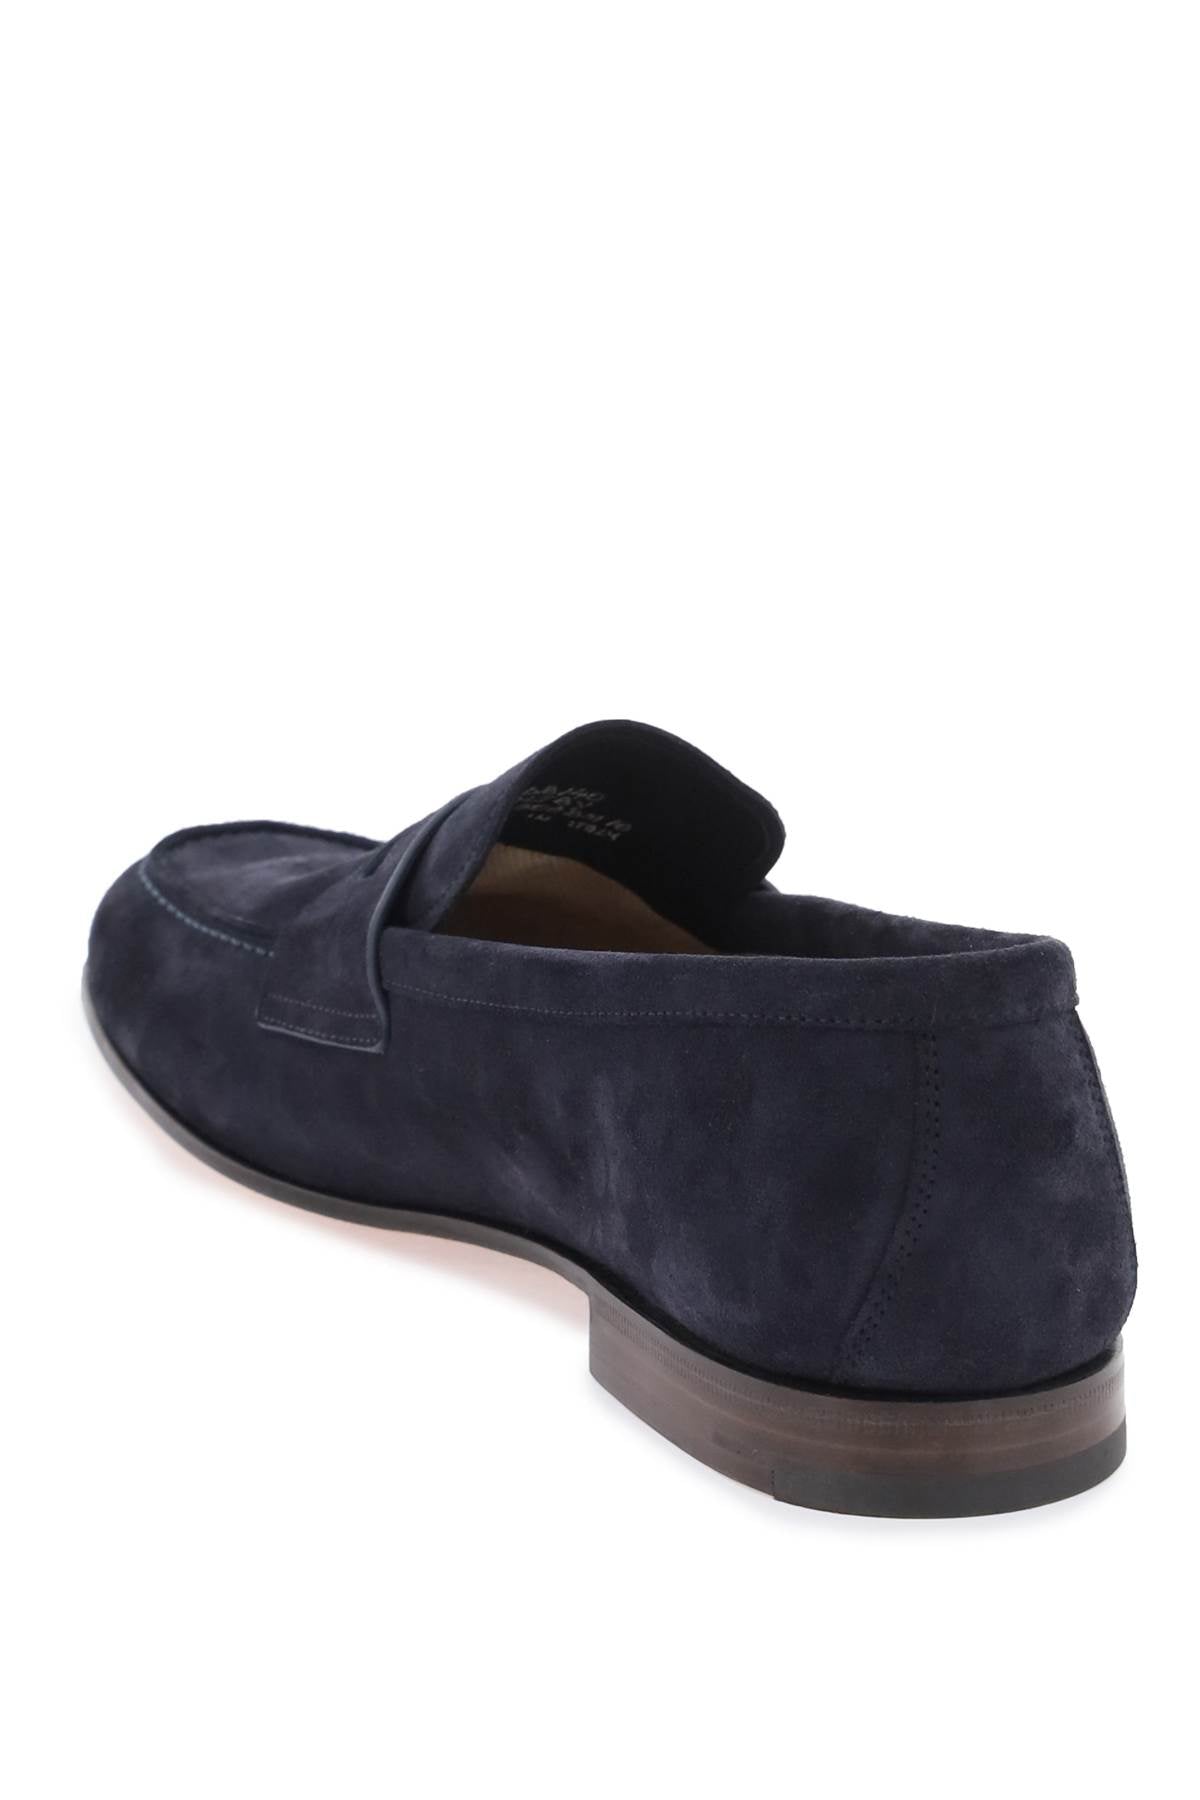 Church's heswall 2 loafers-2